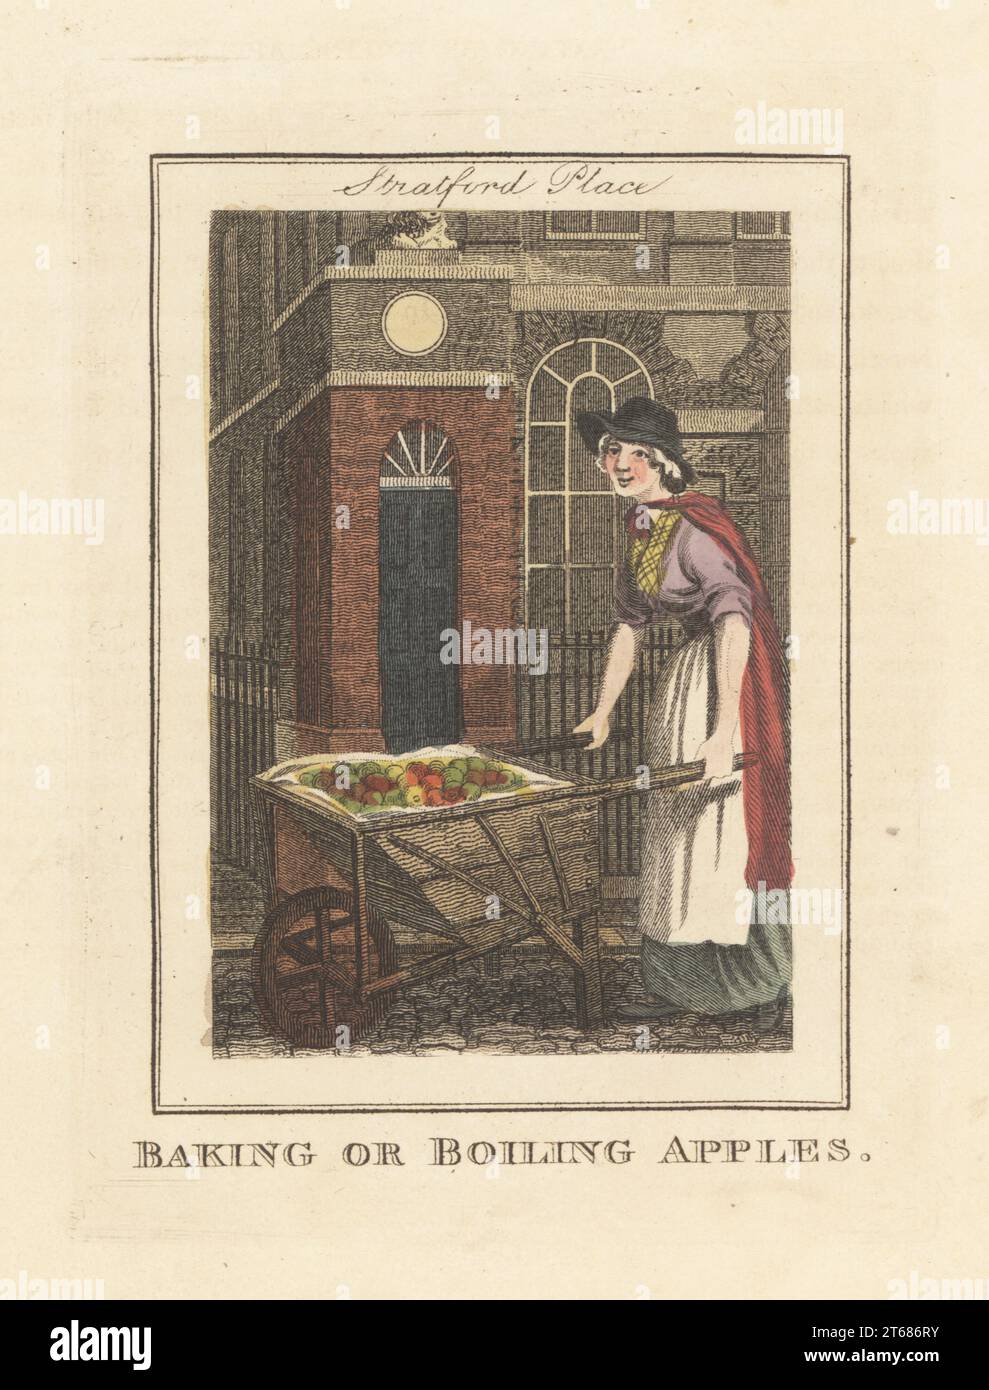 Woman apple seller in Stratford Place, London. Woman in bonnet, cloak, apron and skirts, with wheelbarrow full of apples, sold hot in winter. Baking or boiling apples! Handcoloured copperplate engraving by Edward Edwards after an illustration by William Marshall Craig from Description of the Plates Representing the Itinerant Traders of London, Richard Phillips, No. 71 St Pauls Churchyard, London, 1805. Stock Photo